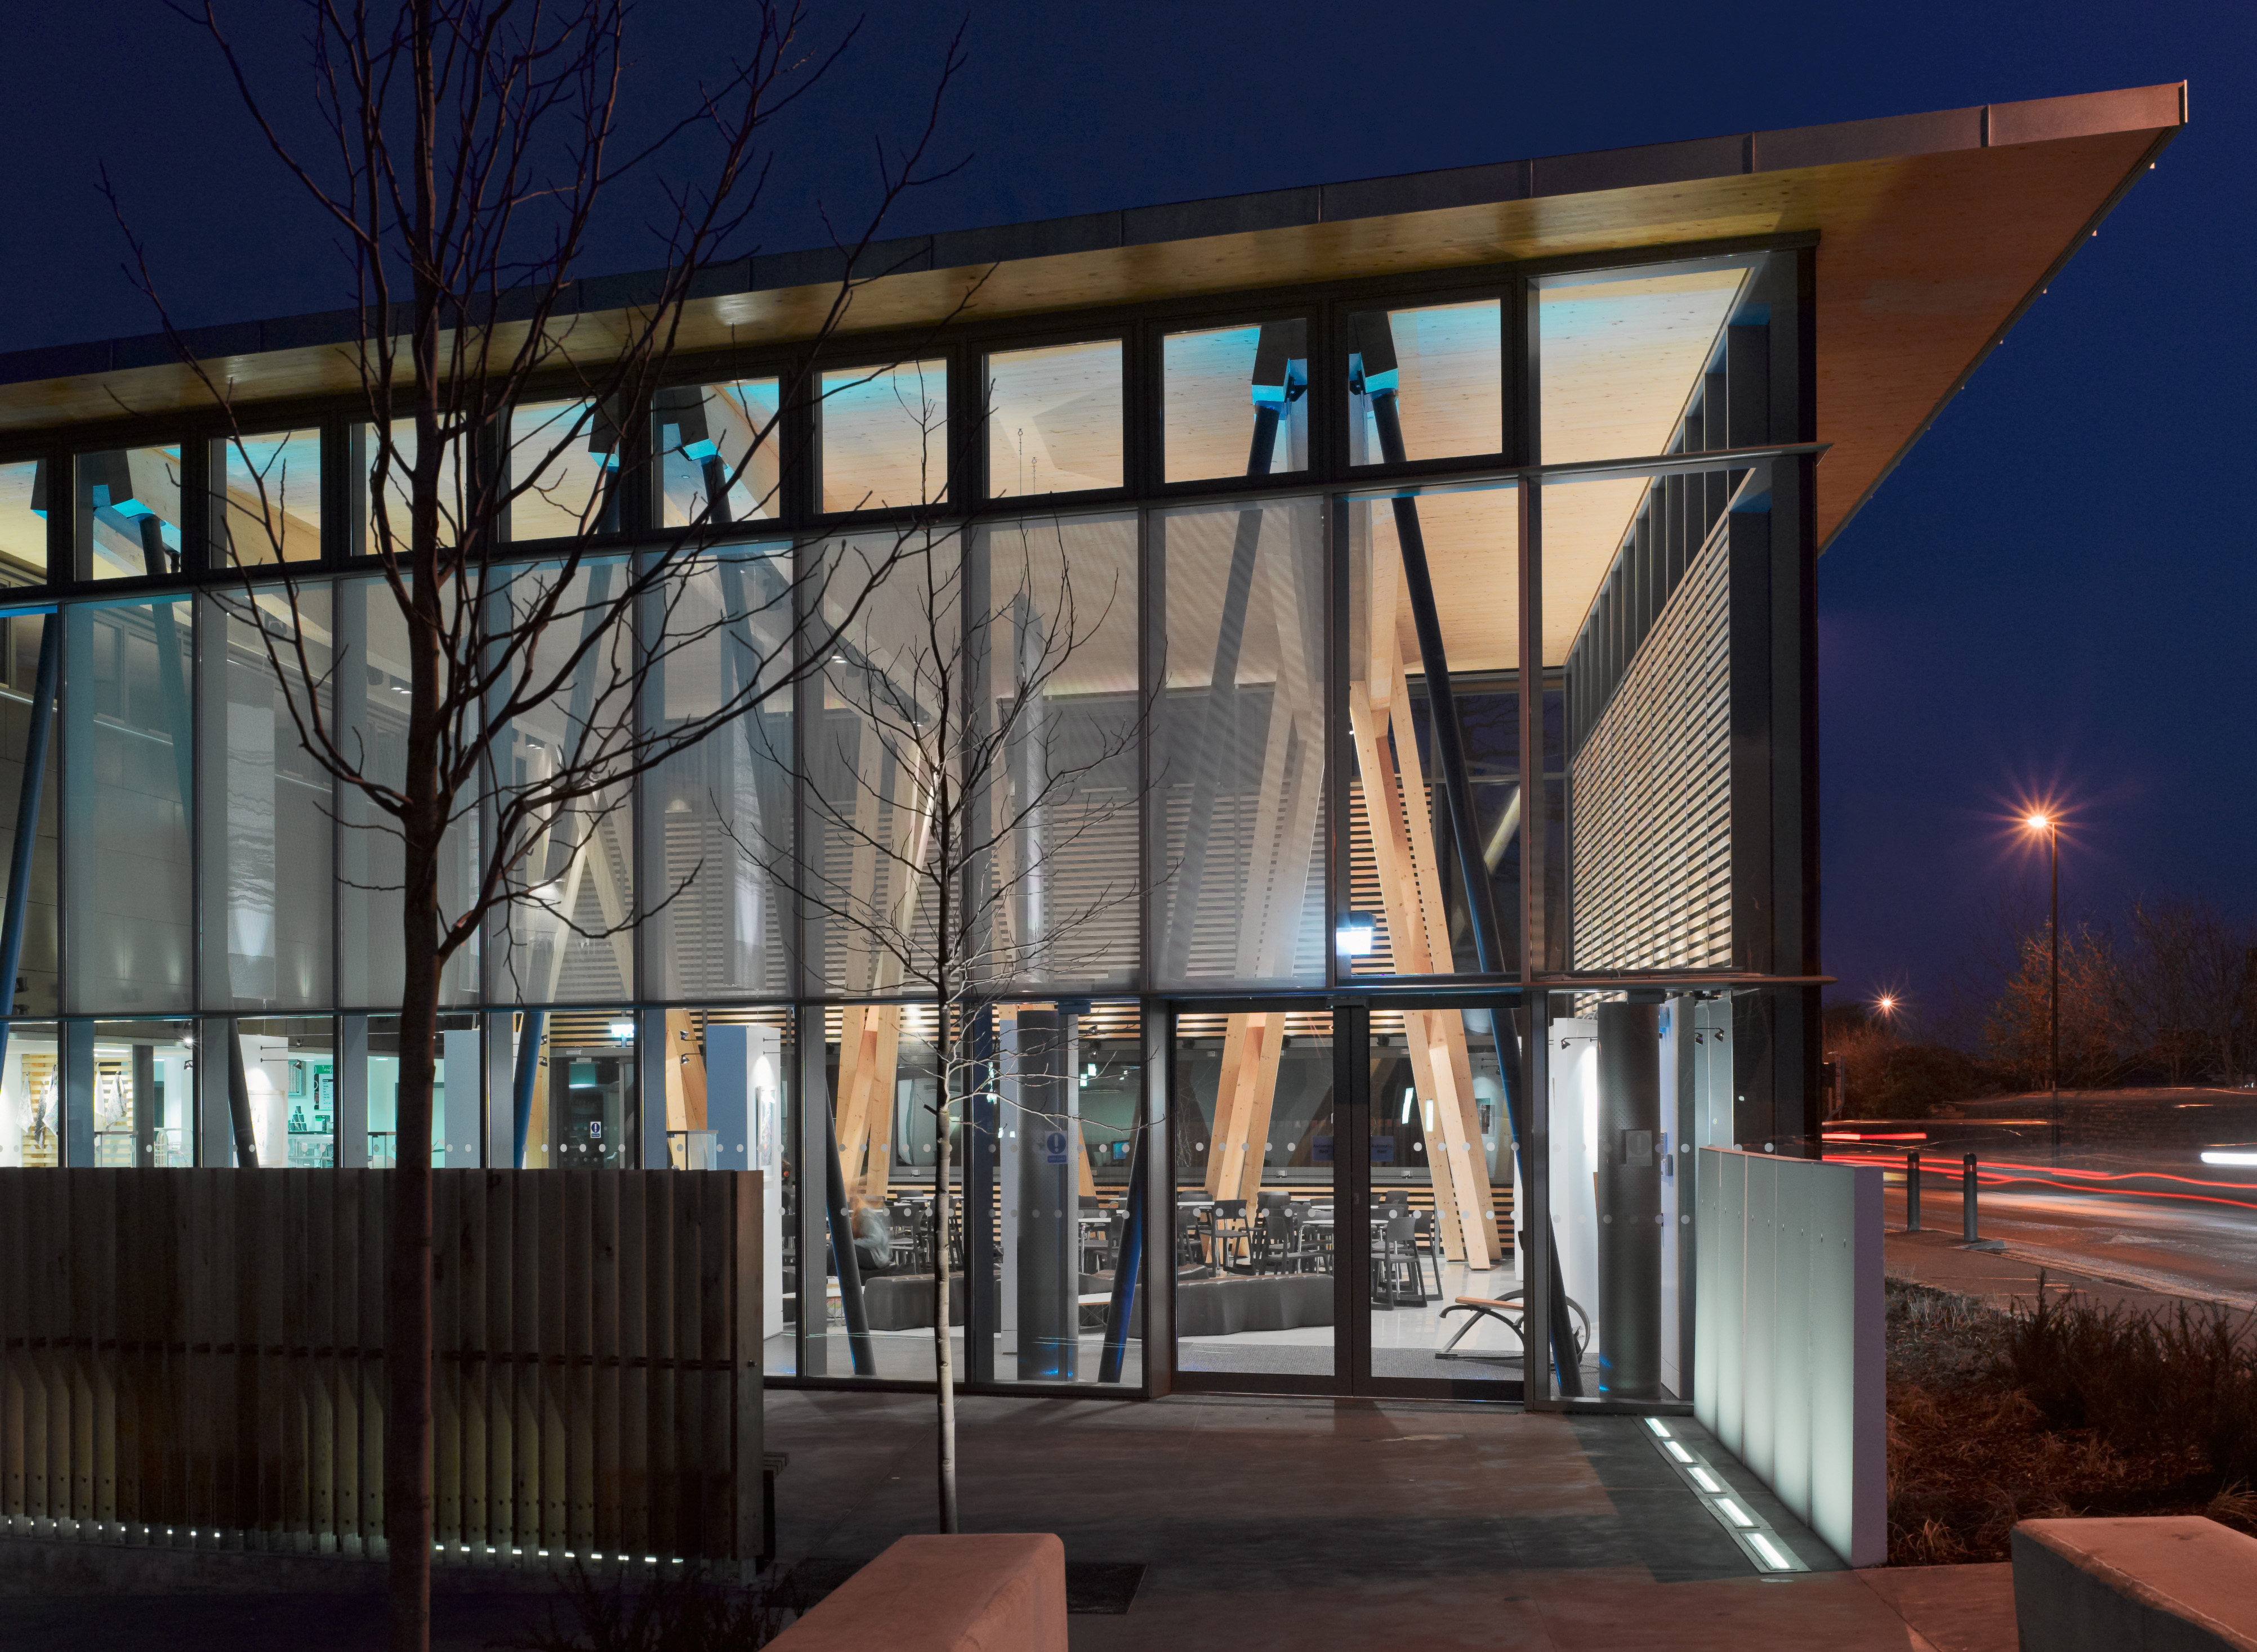 Night view entrance of HCA Arts Space with timber structure and led lighting.